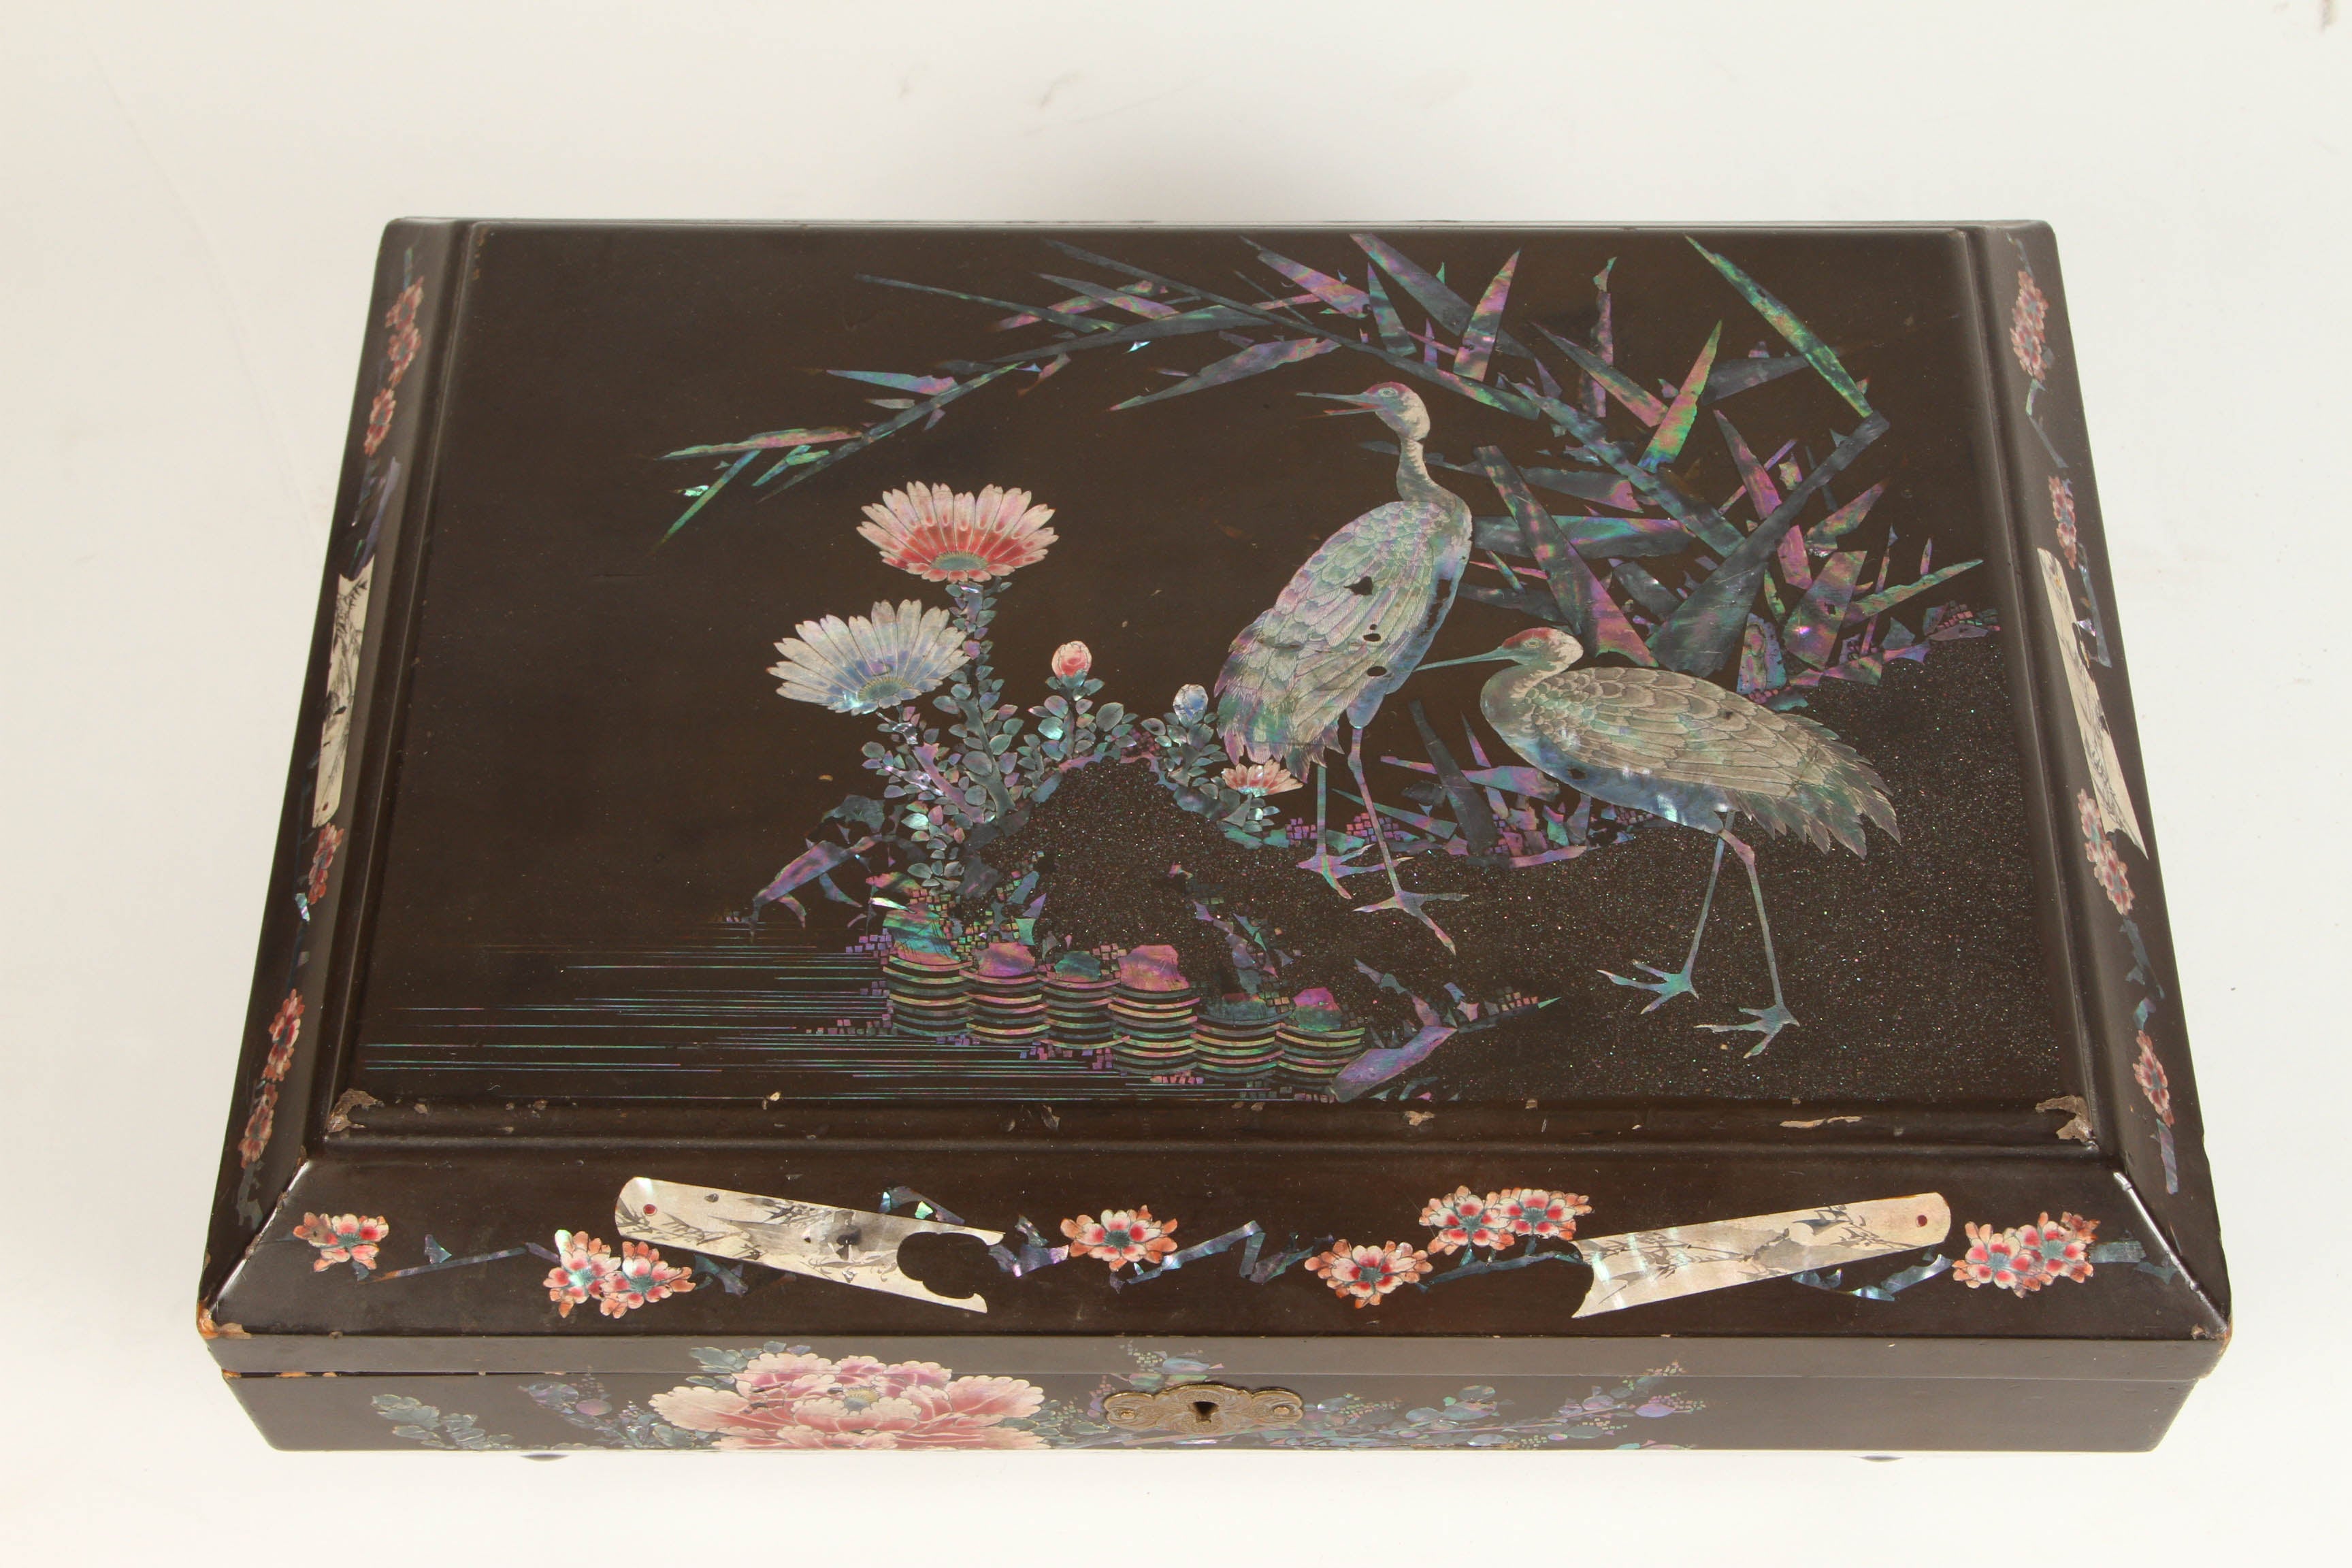 A lacquered and mother of pearl inlaid Japanese sewing box. This Japanese lacquered box is decorated in scenes of cranes and flowers. Inside, the box has numerous small separate areas for sewing supplies.